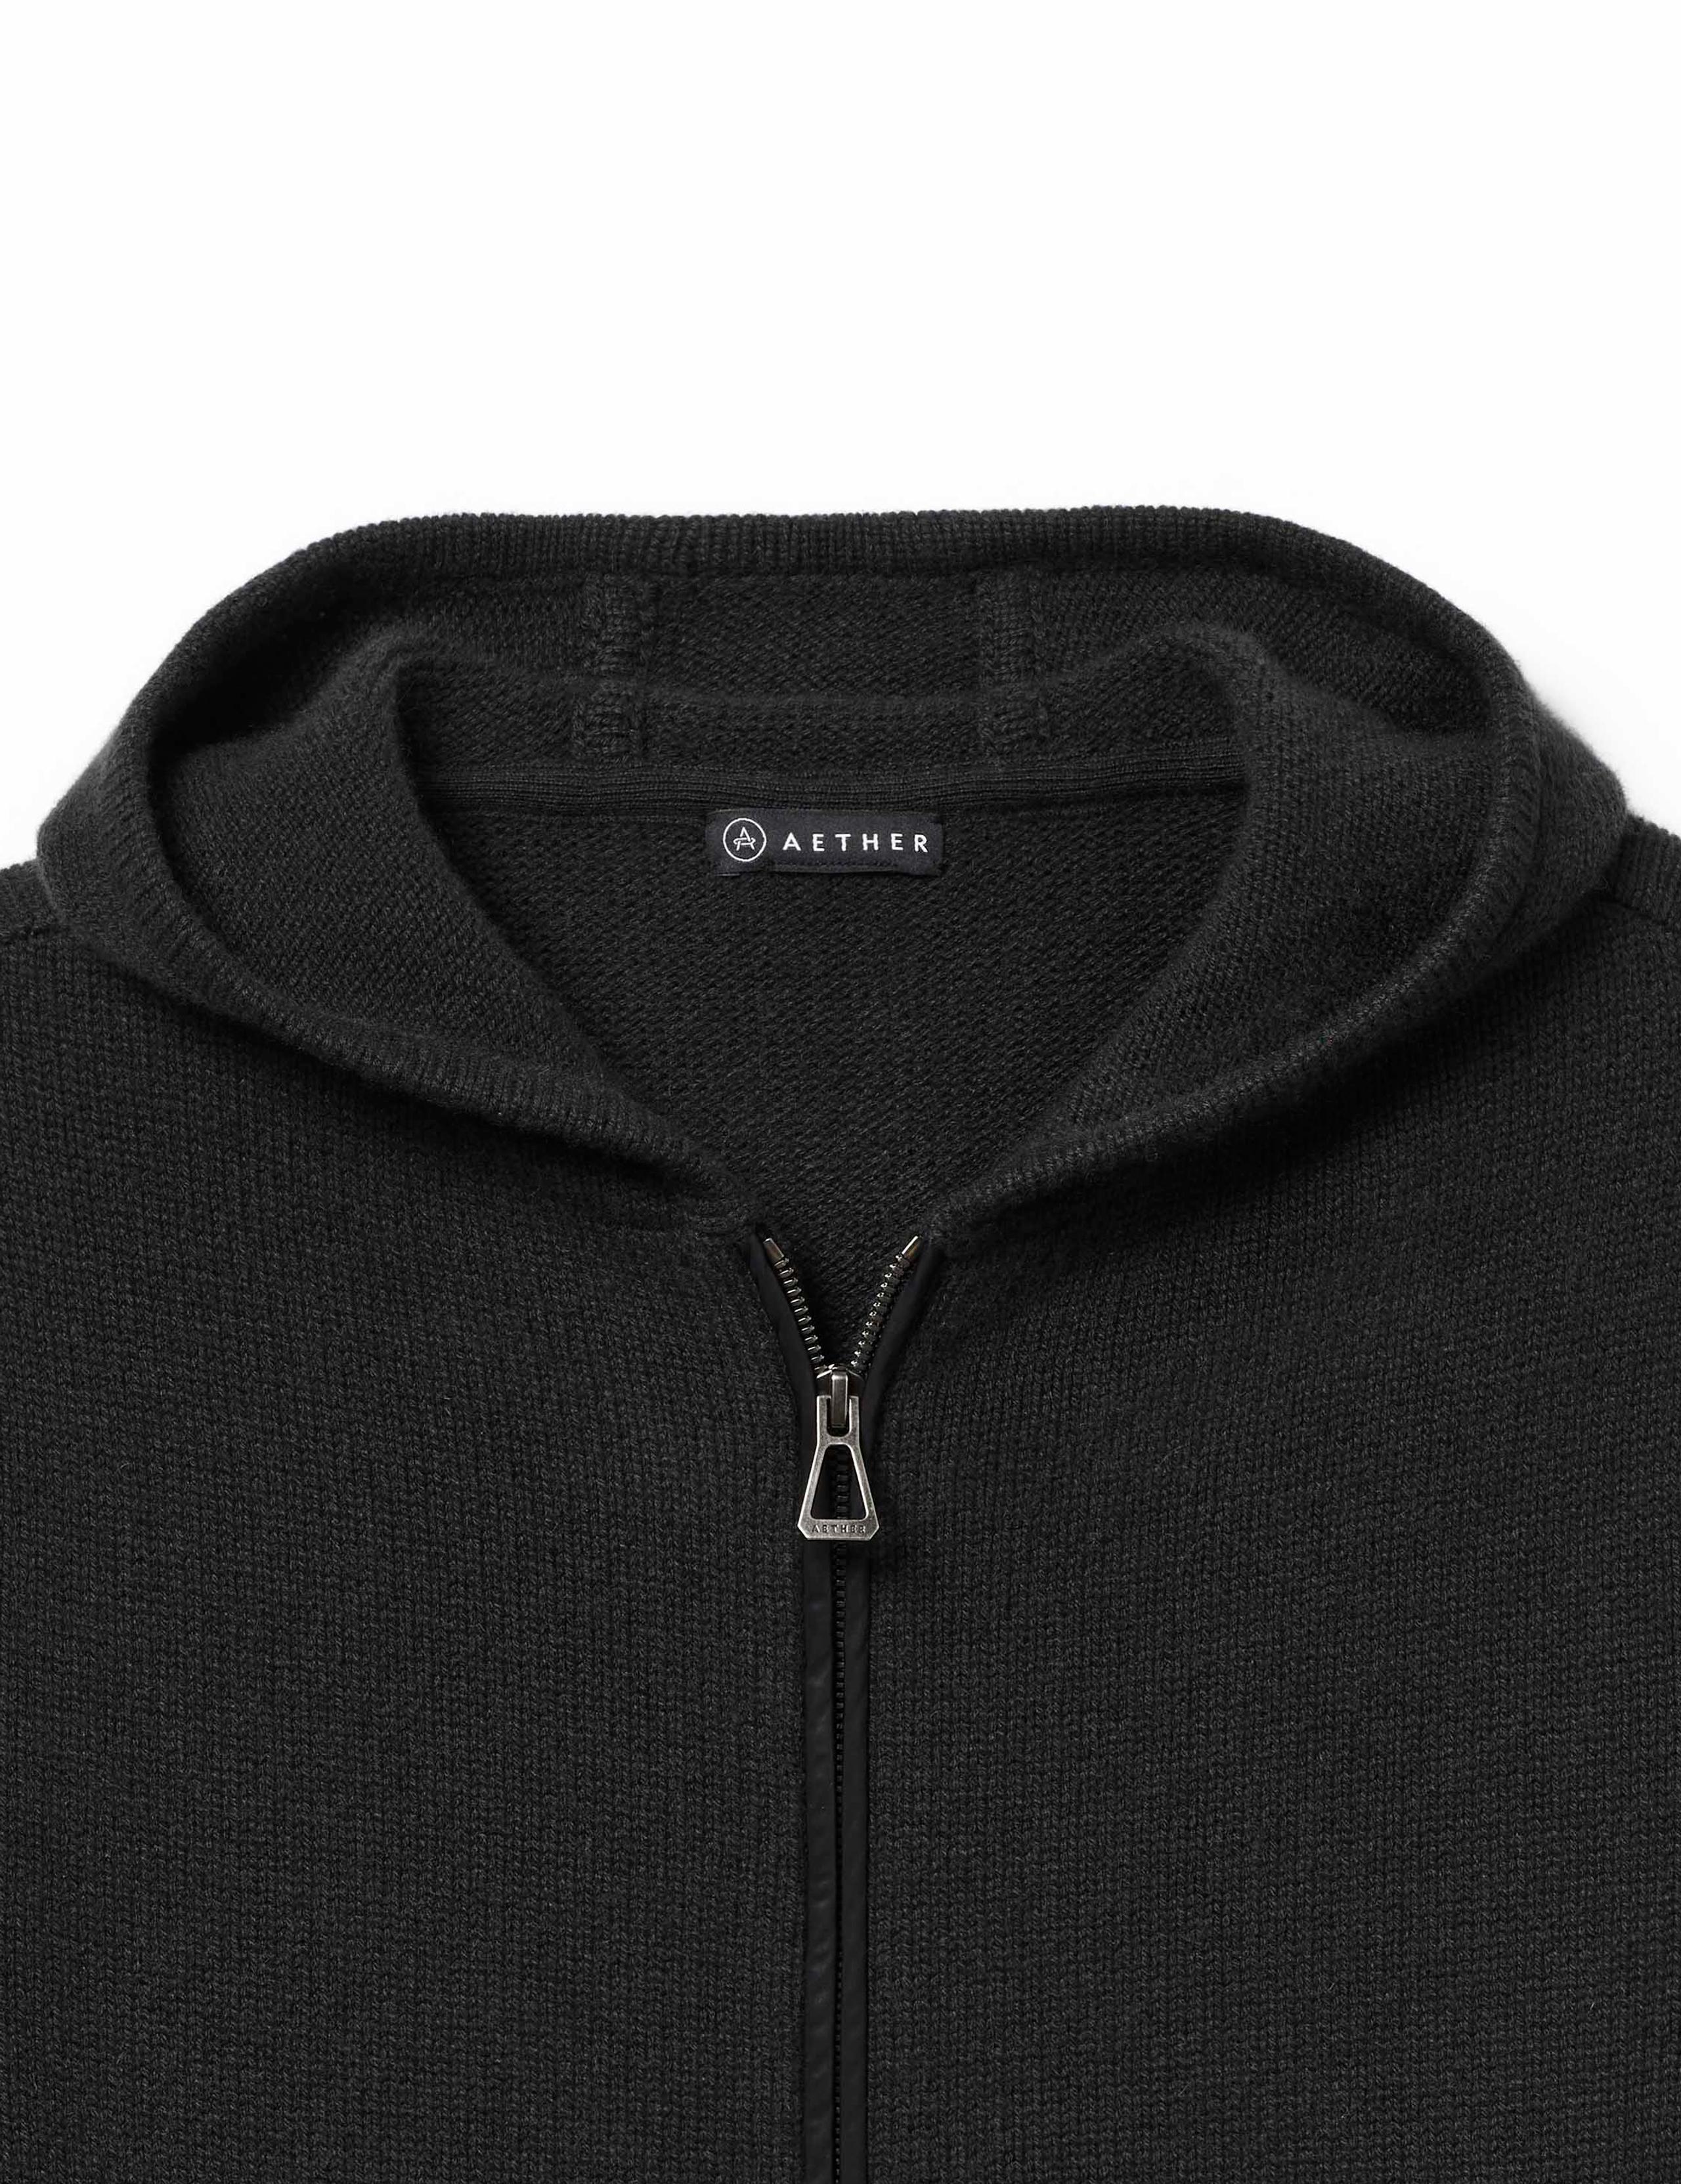 Detailed shot of the Sawyer Cashmere Full-Zip in Onyx Black